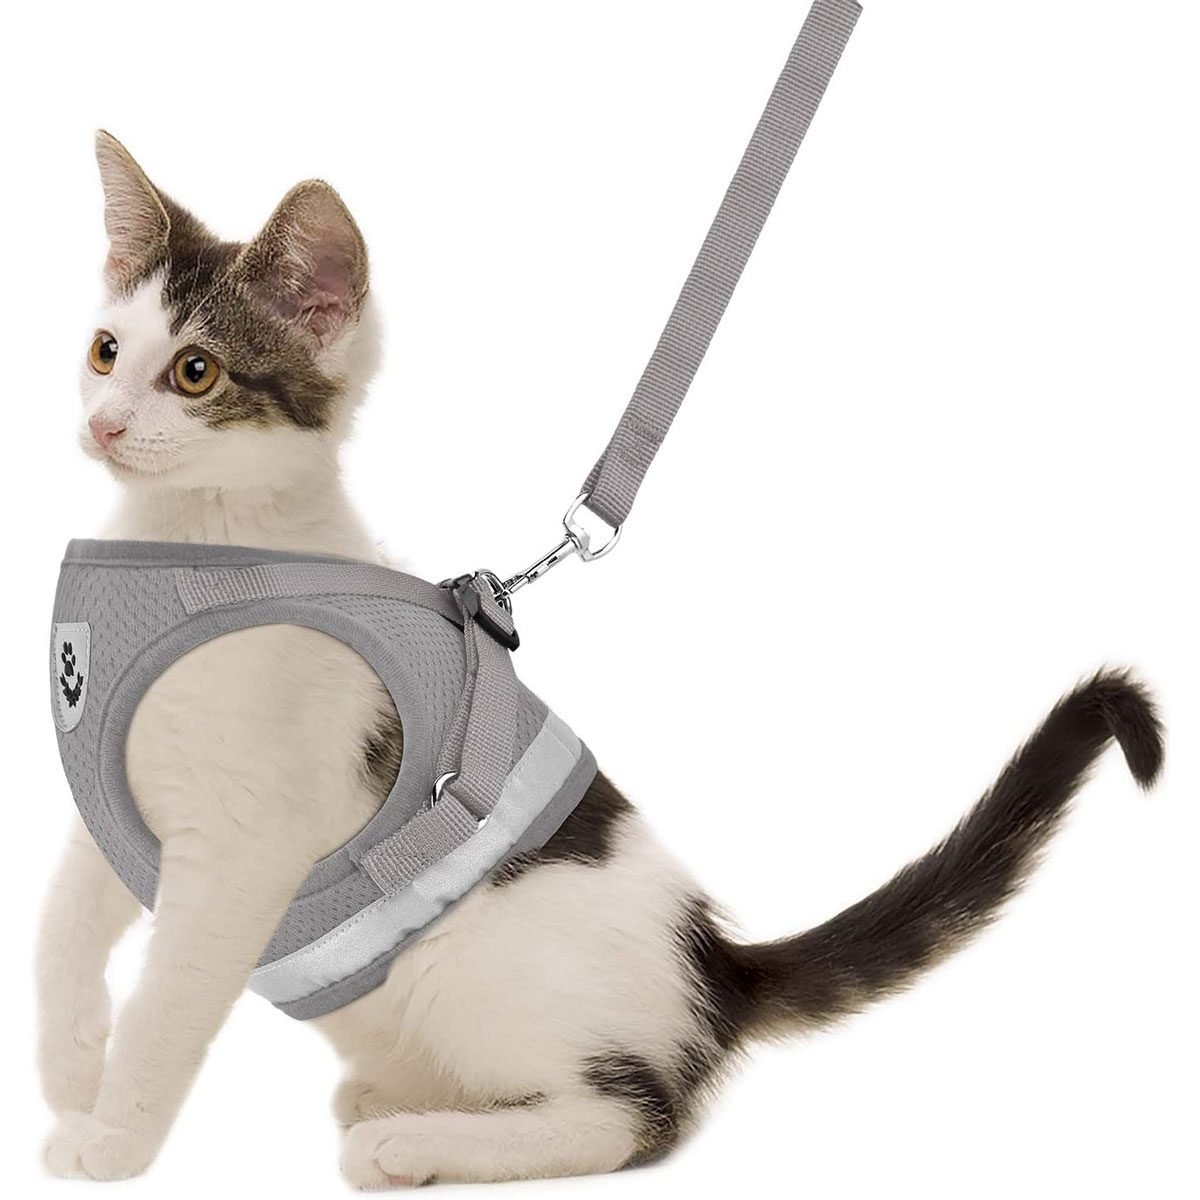 Take your feline friend for a walk Our top 10 Cat Harnesses with